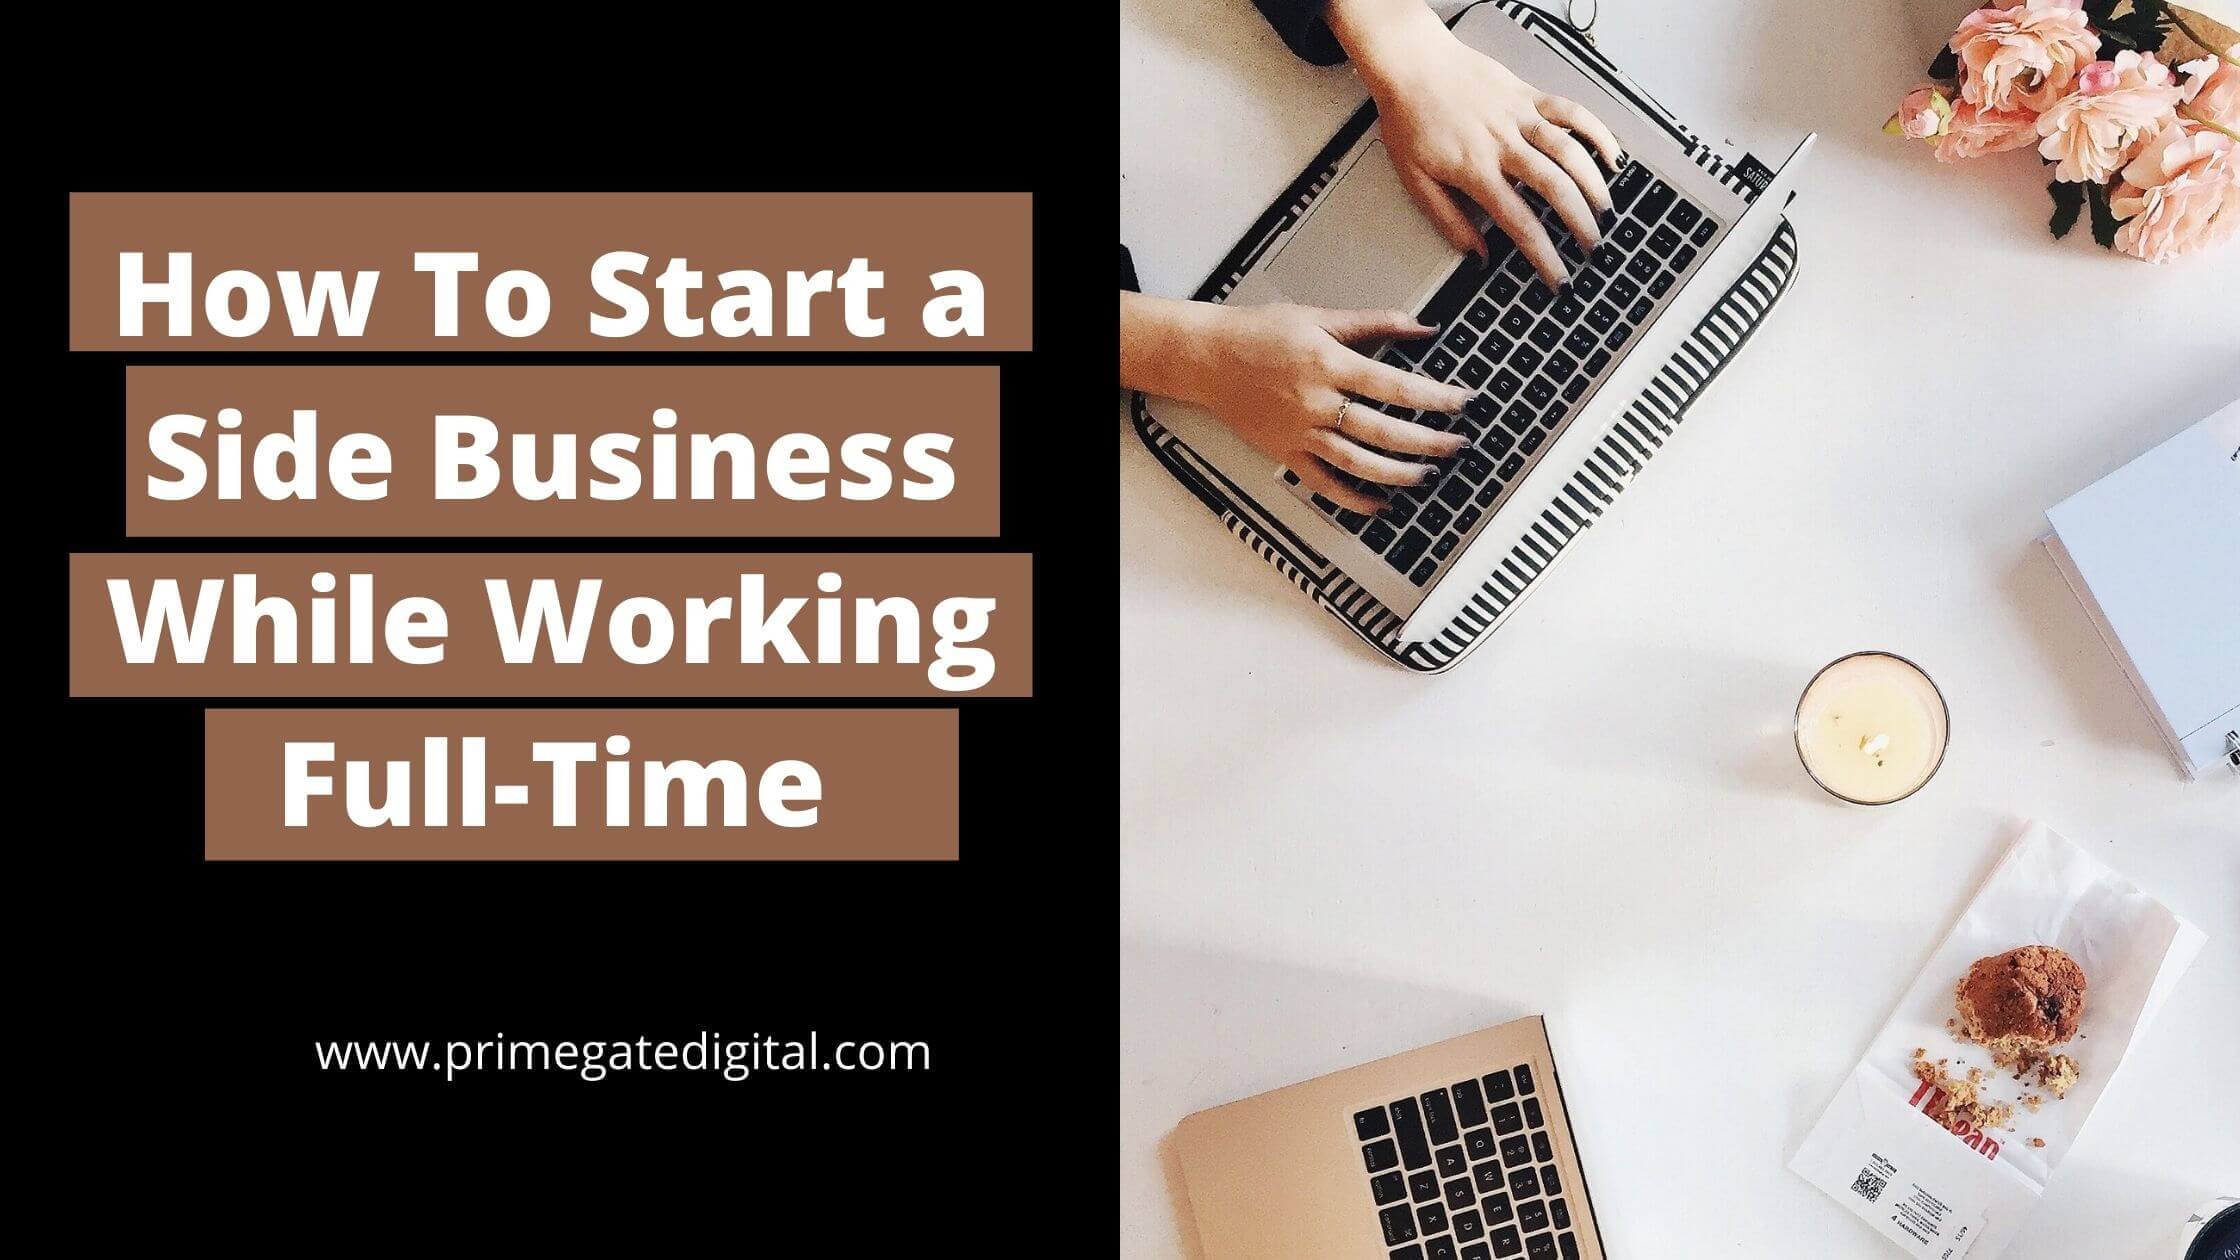 How To Start a Side Business While Working Full-Time